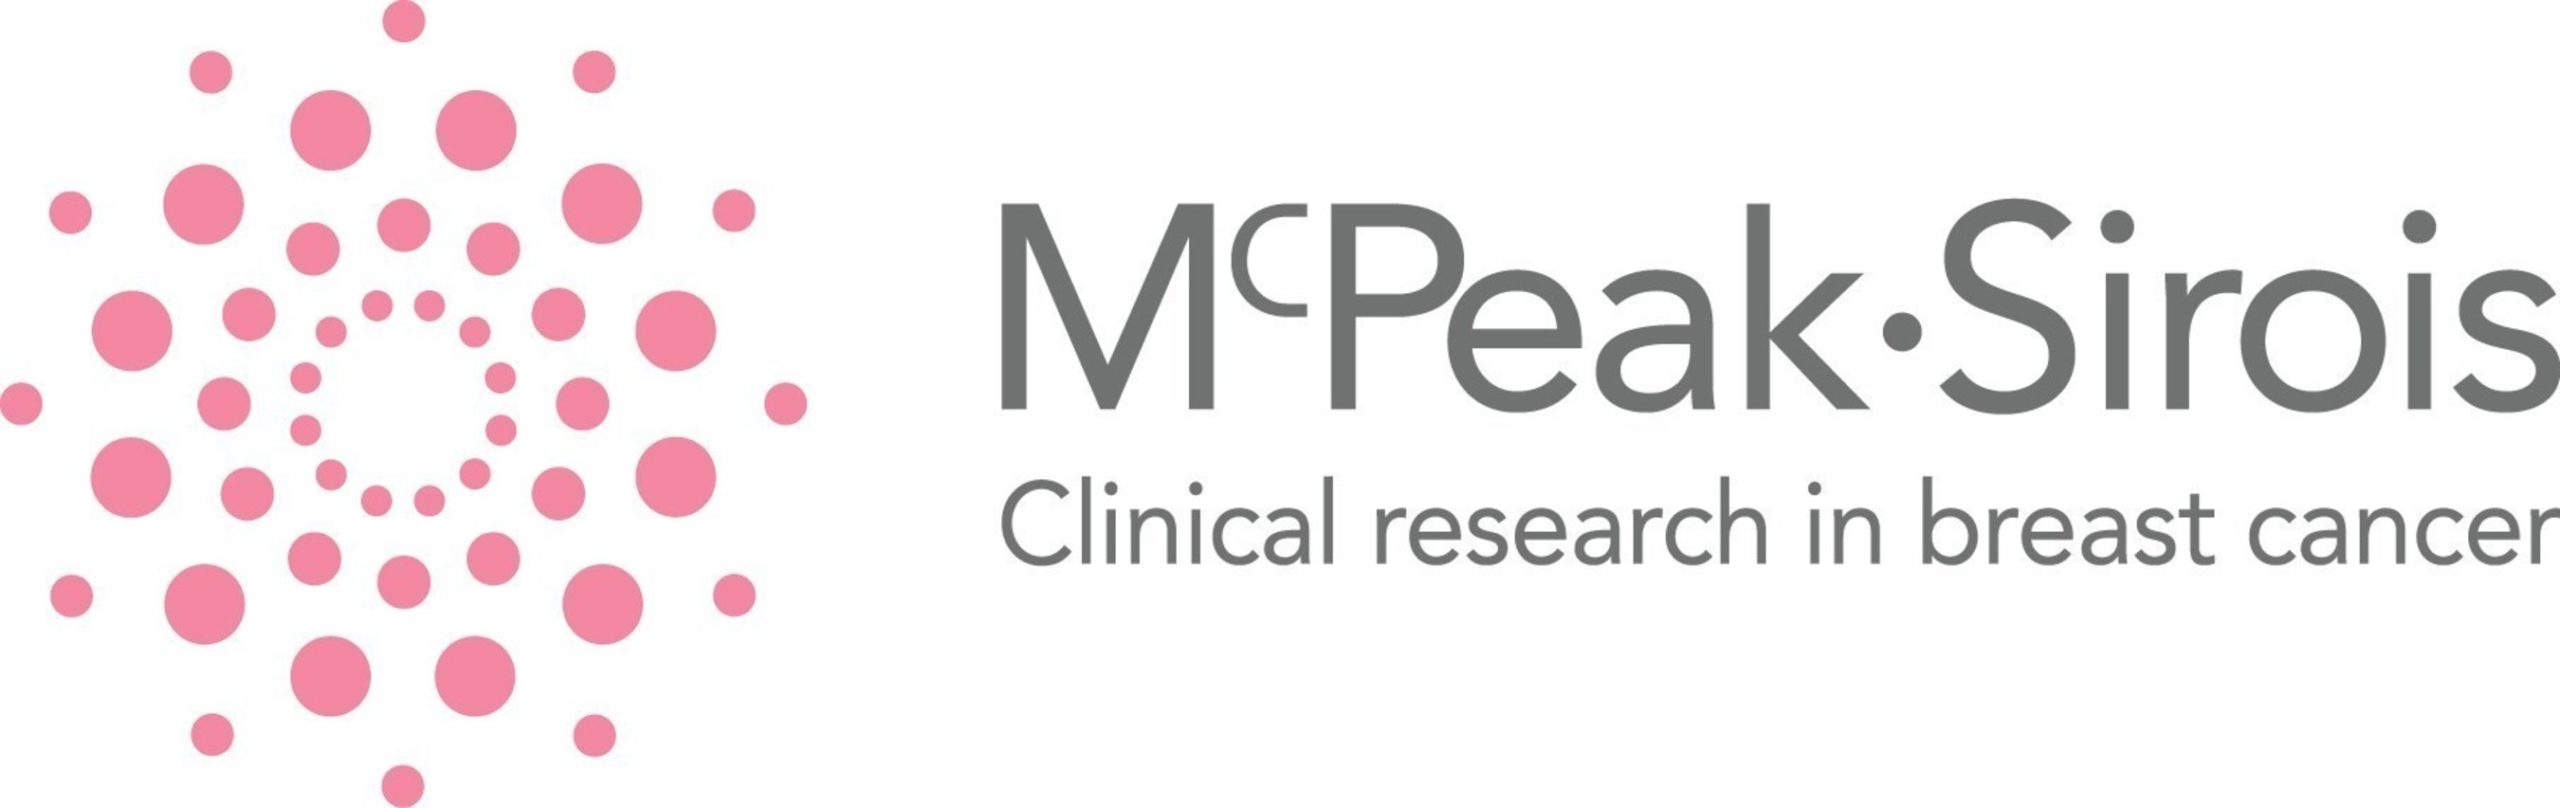 McPeak Sirois – Clinical research in breast cancer